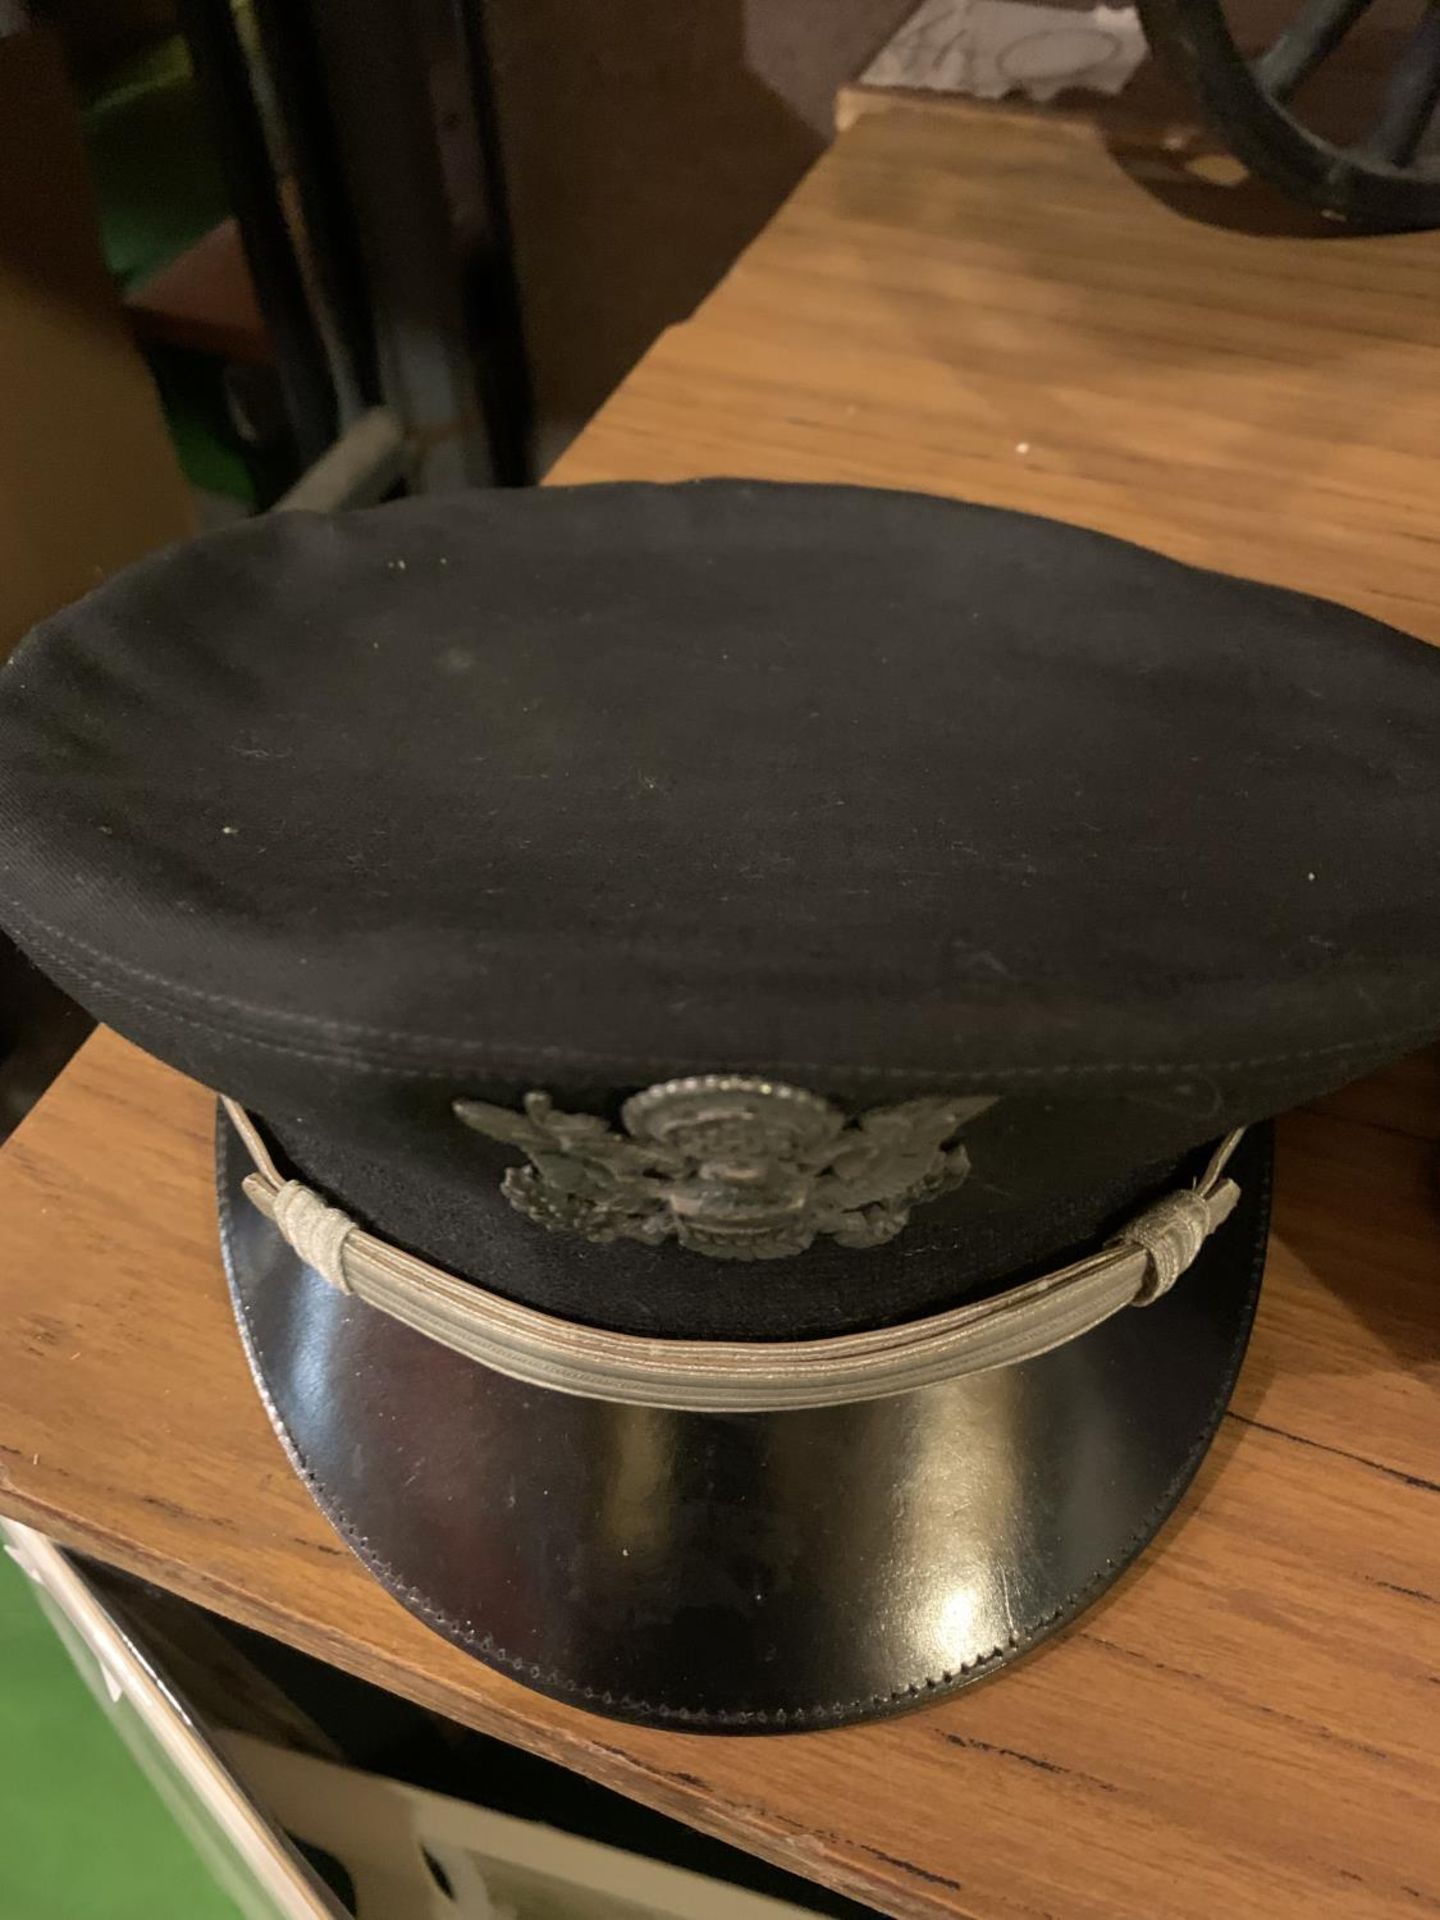 A U.S.A. CAPTAINS PEAKED CAP AND A FRENCH KEPE CAP (2) - Image 3 of 4